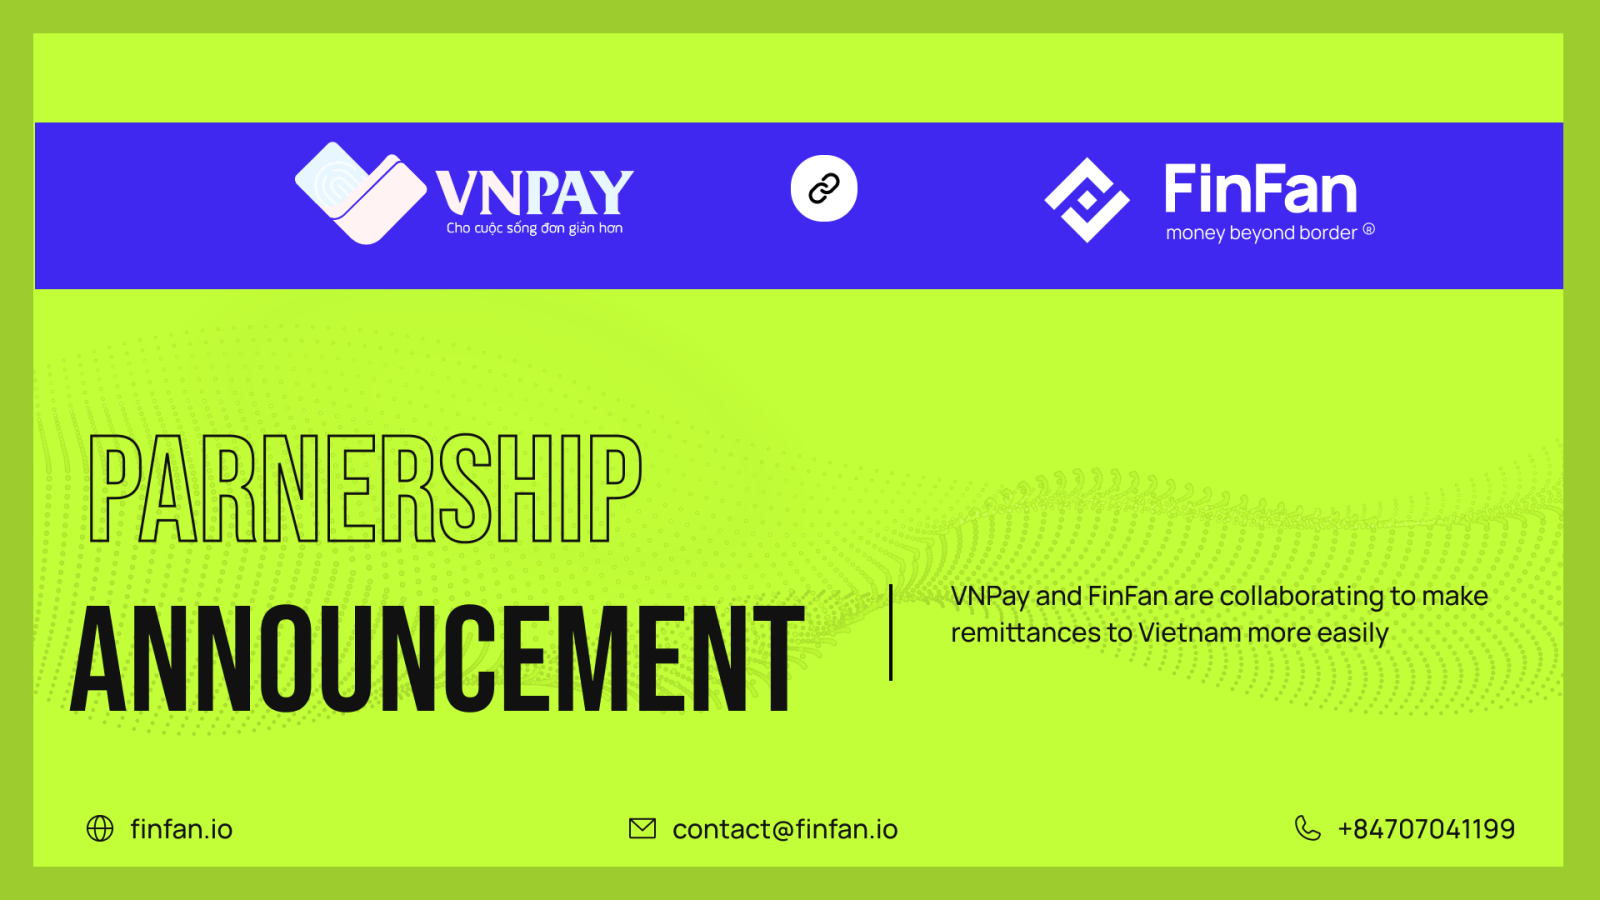 VNPay and FinFan are collaborating to make remittances to Vietnam more easily